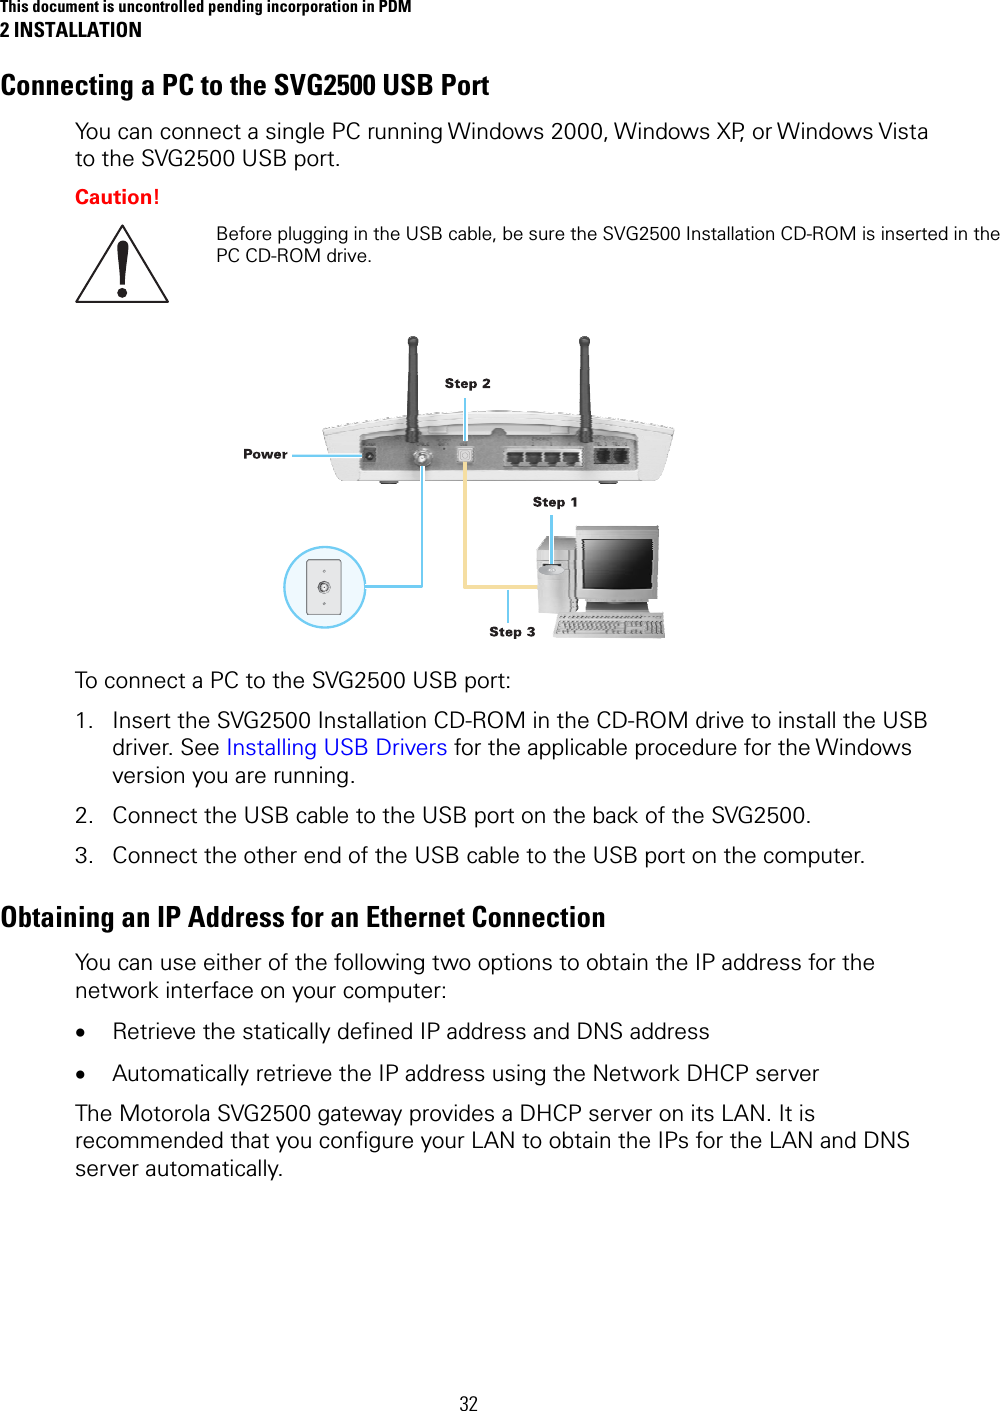 This document is uncontrolled pending incorporation in PDM 2 INSTALLATION 32 Connecting a PC to the SVG2500 USB Port You can connect a single PC running Windows 2000, Windows XP, or Windows Vista to the SVG2500 USB port. Caution!  Before plugging in the USB cable, be sure the SVG2500 Installation CD-ROM is inserted in the PC CD-ROM drive.  To connect a PC to the SVG2500 USB port: 1. Insert the SVG2500 Installation CD-ROM in the CD-ROM drive to install the USB driver. See Installing USB Drivers for the applicable procedure for the Windows version you are running. 2. Connect the USB cable to the USB port on the back of the SVG2500. 3. Connect the other end of the USB cable to the USB port on the computer. Obtaining an IP Address for an Ethernet Connection You can use either of the following two options to obtain the IP address for the network interface on your computer: • Retrieve the statically defined IP address and DNS address • Automatically retrieve the IP address using the Network DHCP server The Motorola SVG2500 gateway provides a DHCP server on its LAN. It is recommended that you configure your LAN to obtain the IPs for the LAN and DNS server automatically.  